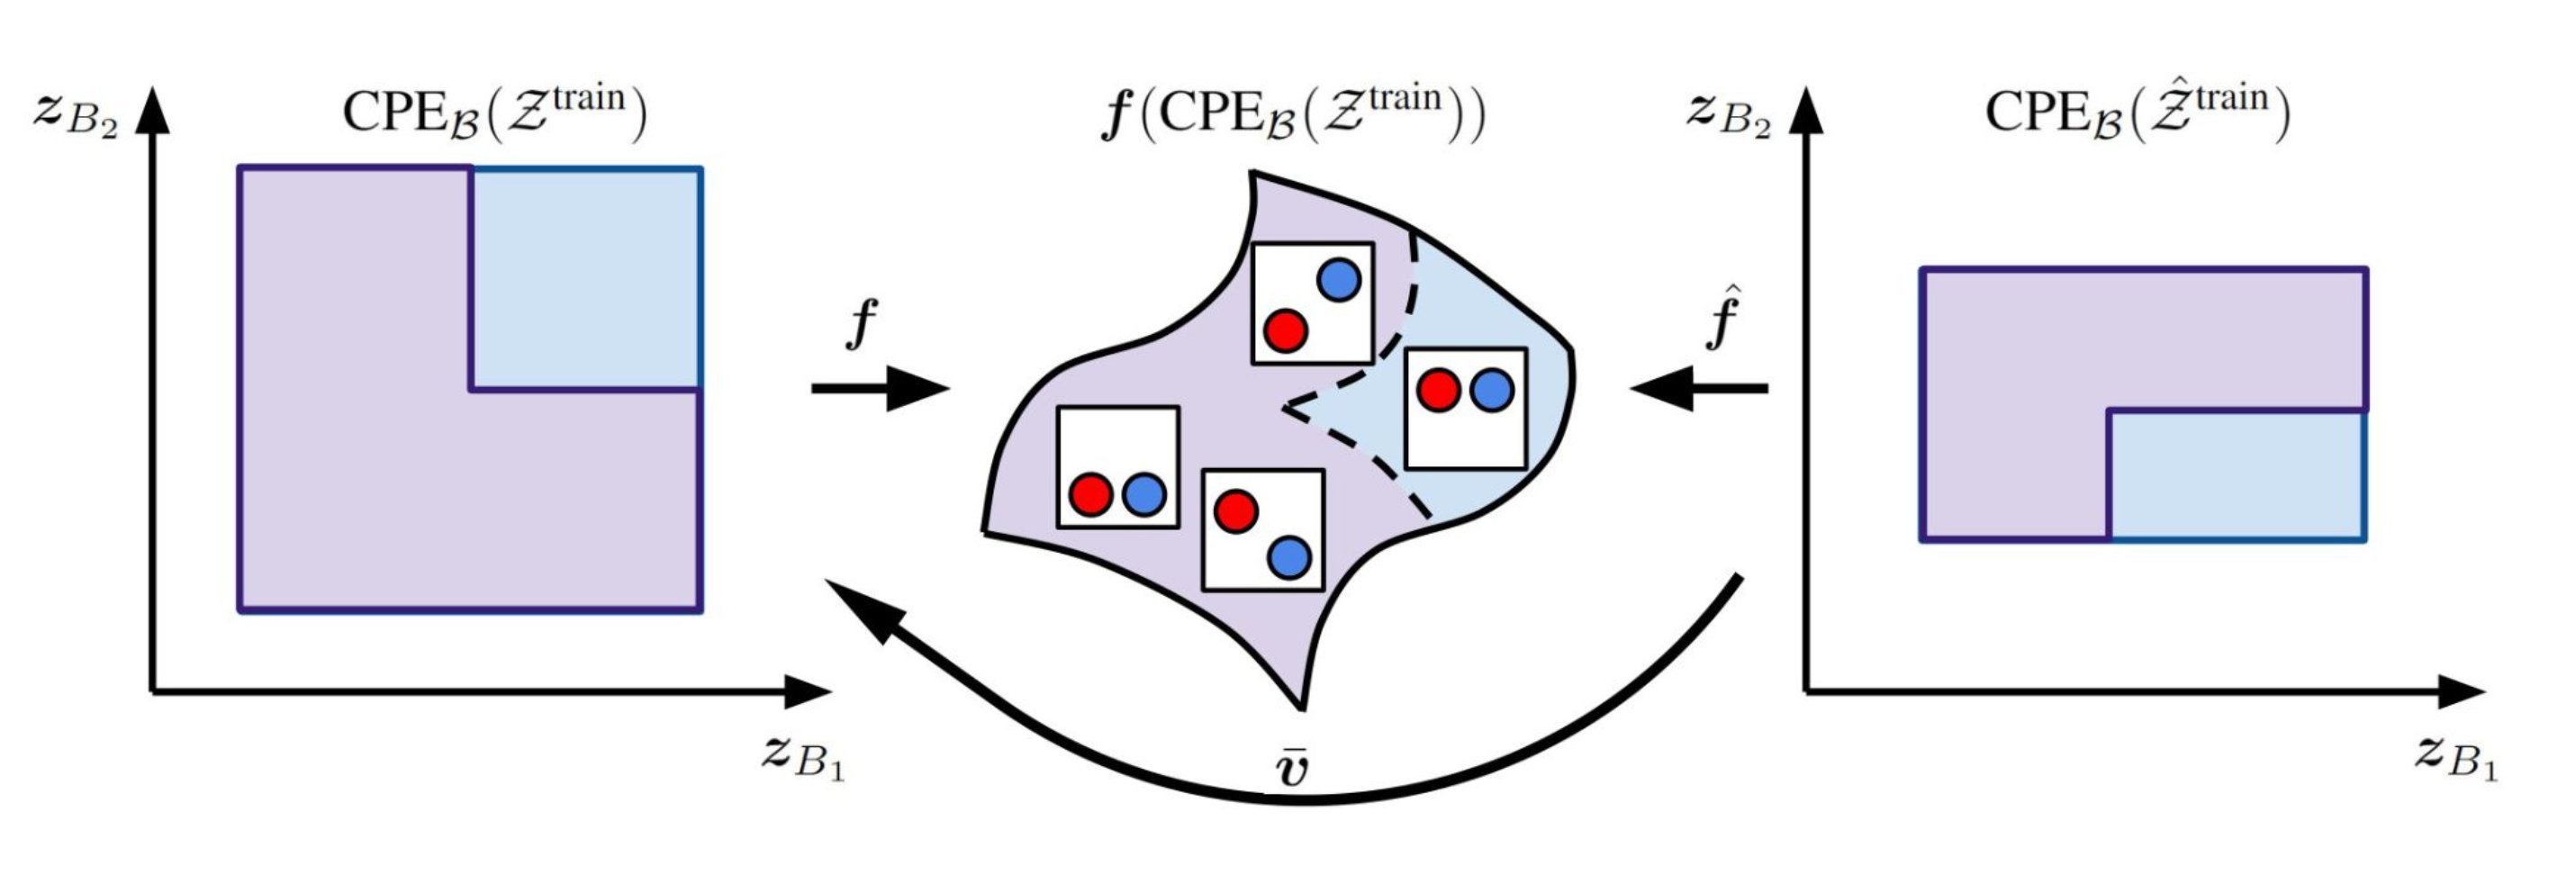 [Figure 1: Additive decoders allow the generation of novel images never seen during training via Cartesian-product extrapolation. Purple regions correspond to latents/observations seen during training. The blue regions correspond to the Cartesian-product extension. The middle set is the manifold of images of circles. In this example, the learner never saw both circles high, but these can be generated nevertheless, thanks to the additive nature of the scene.]